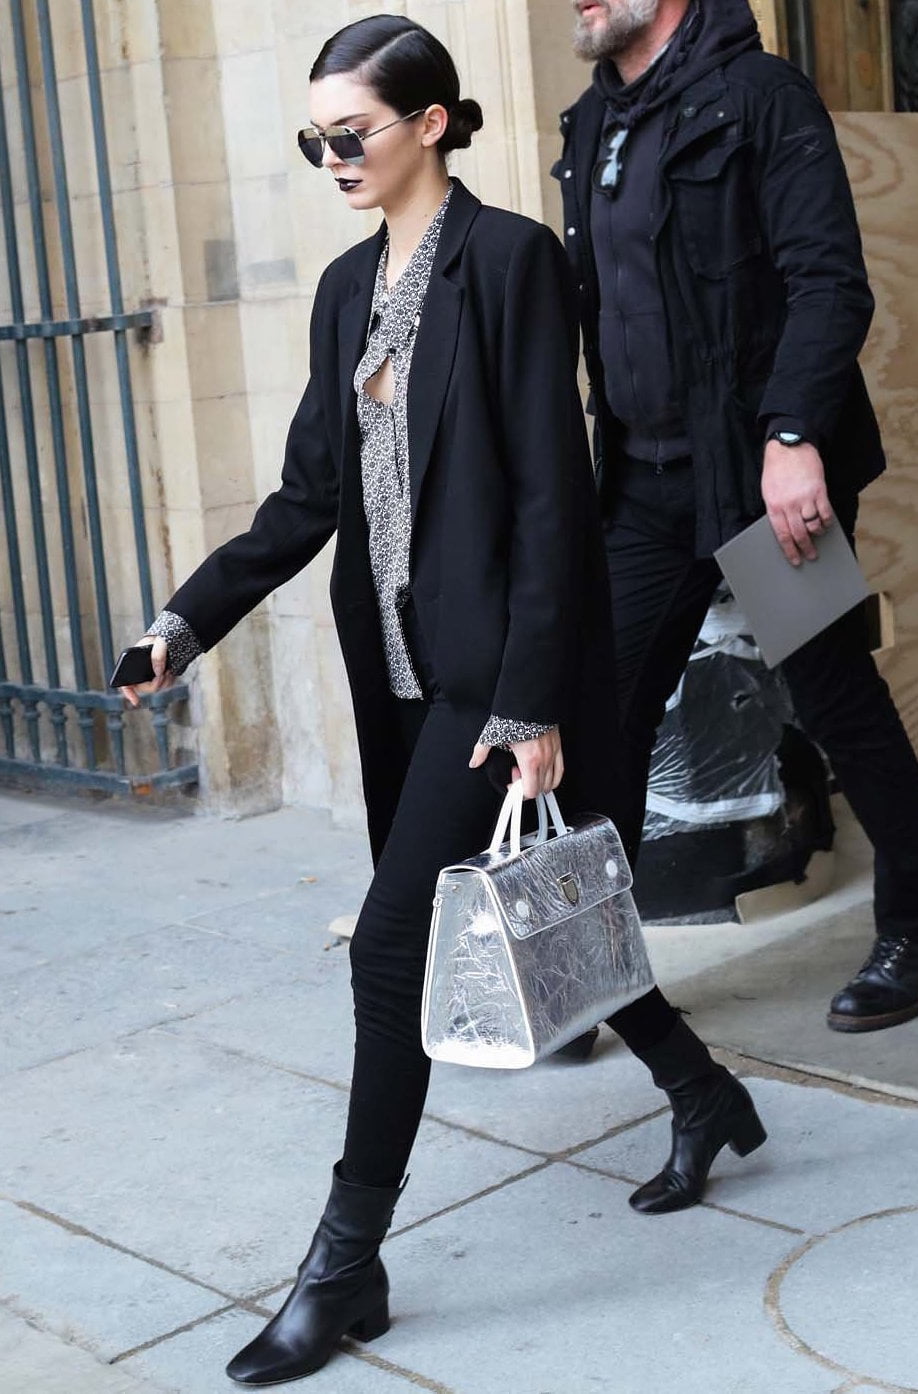 What Is The Lady Dior Bag And Why Do Celebs Love It?